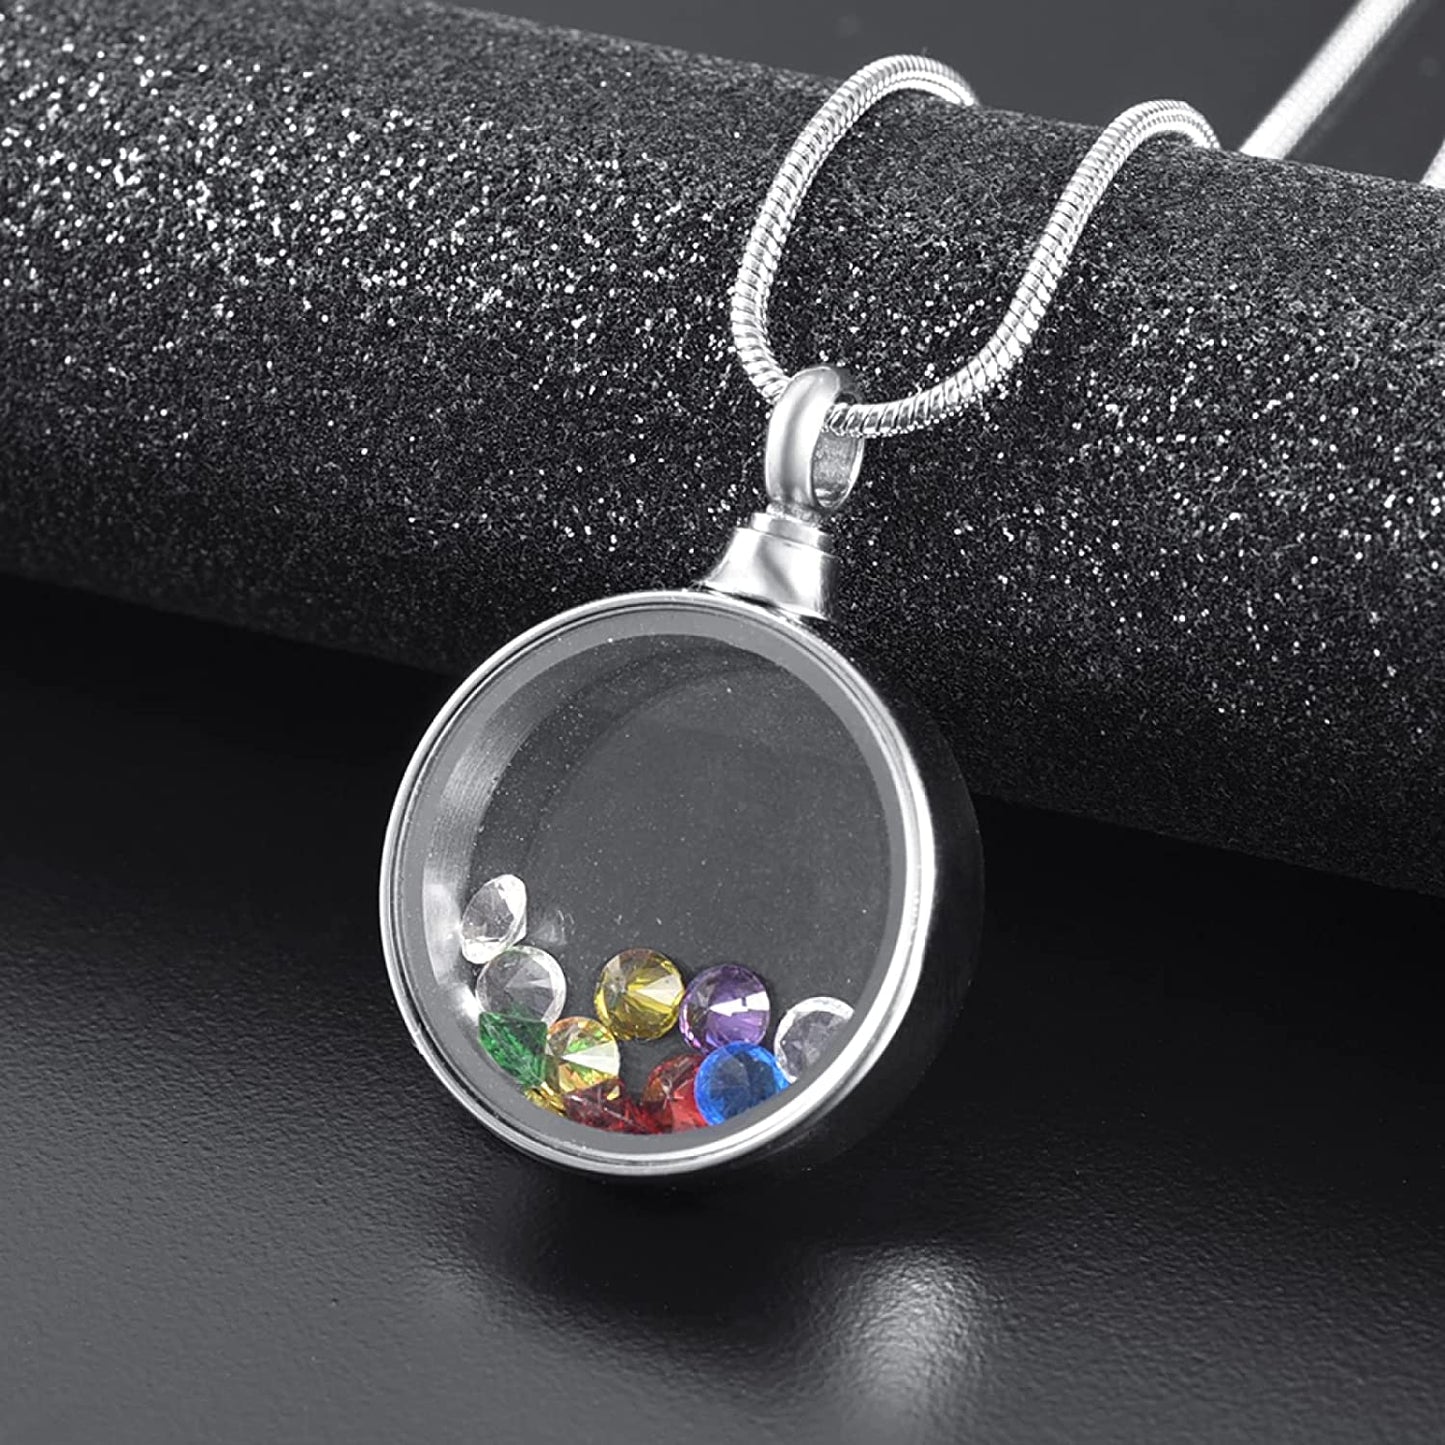 316L Urn Necklaces Colorful Stone Round Glass Cremation Pendant Memorial Jewelry Ashes Holder For Humen/Pet Funeral Keepsake Necklace